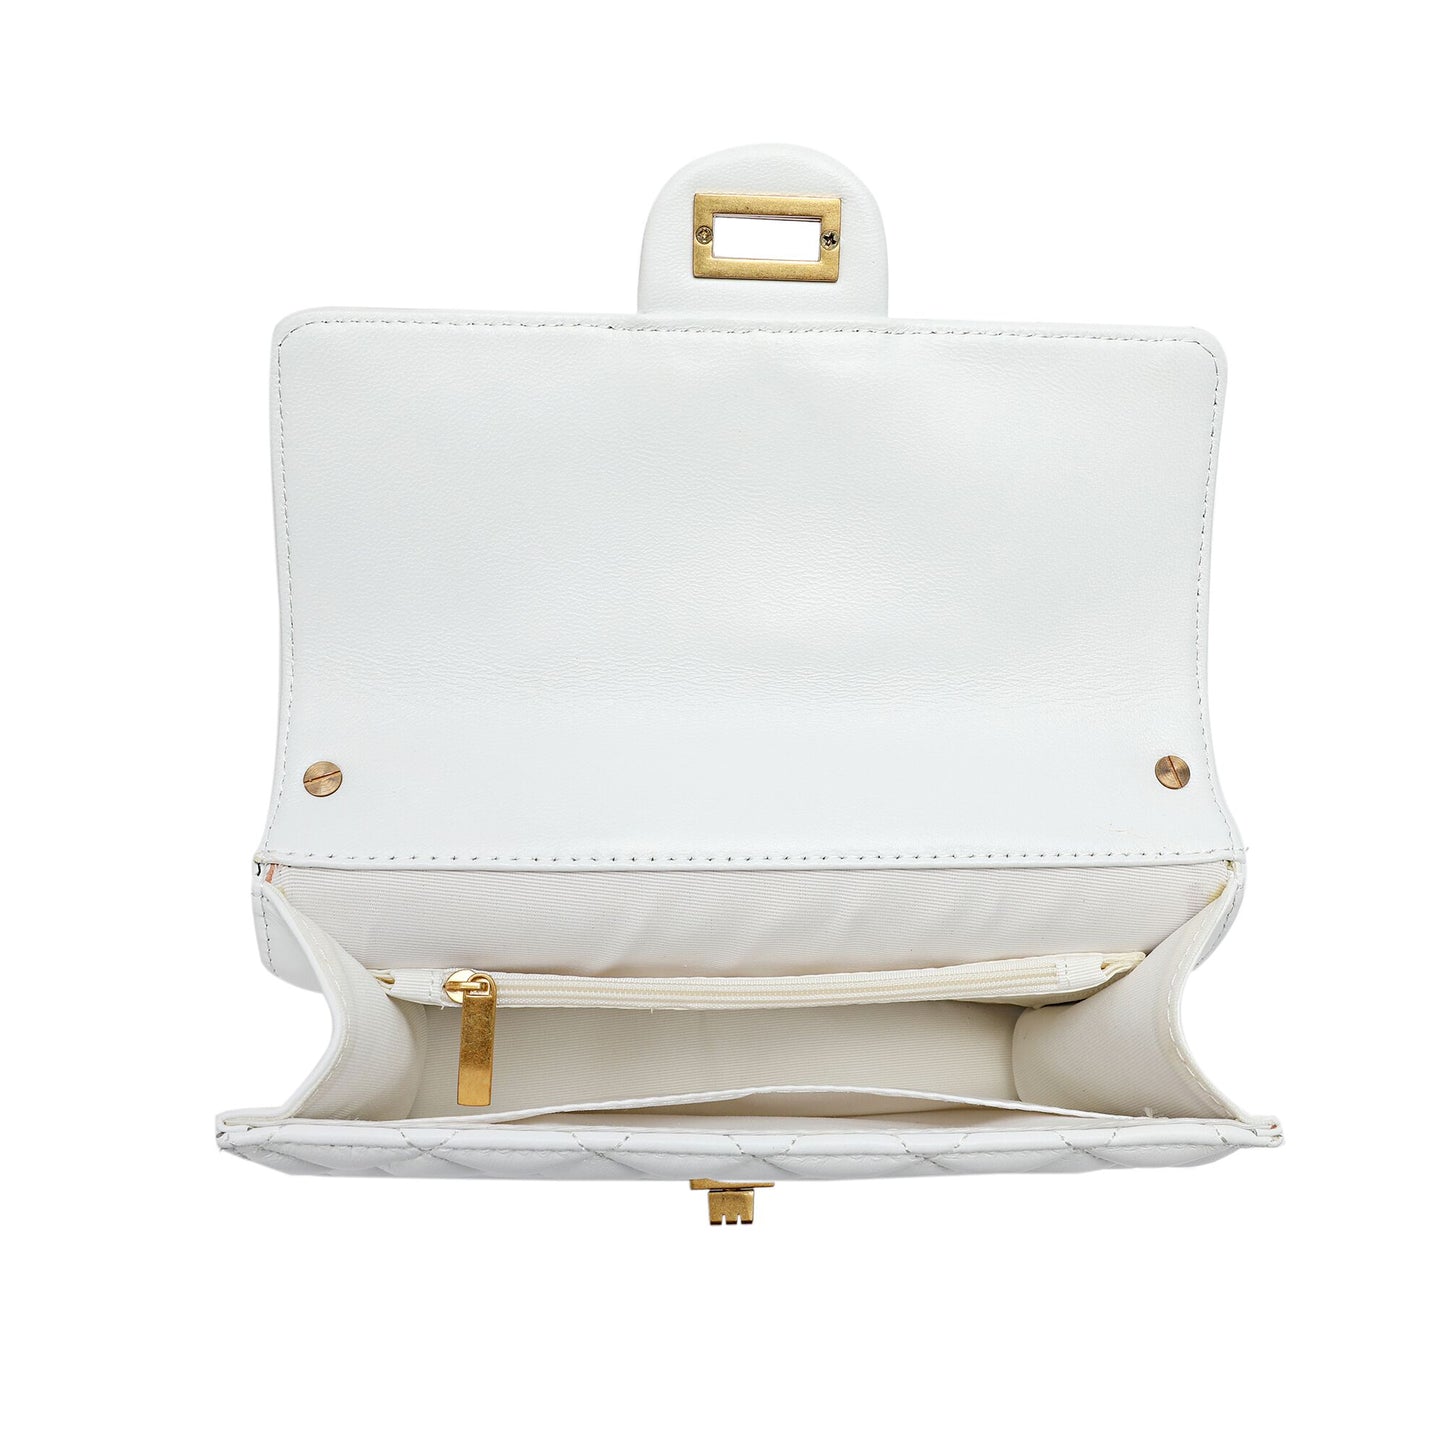 Full-grain Lambskin Leather Shoulder Bag Embellished With Faux Pearls